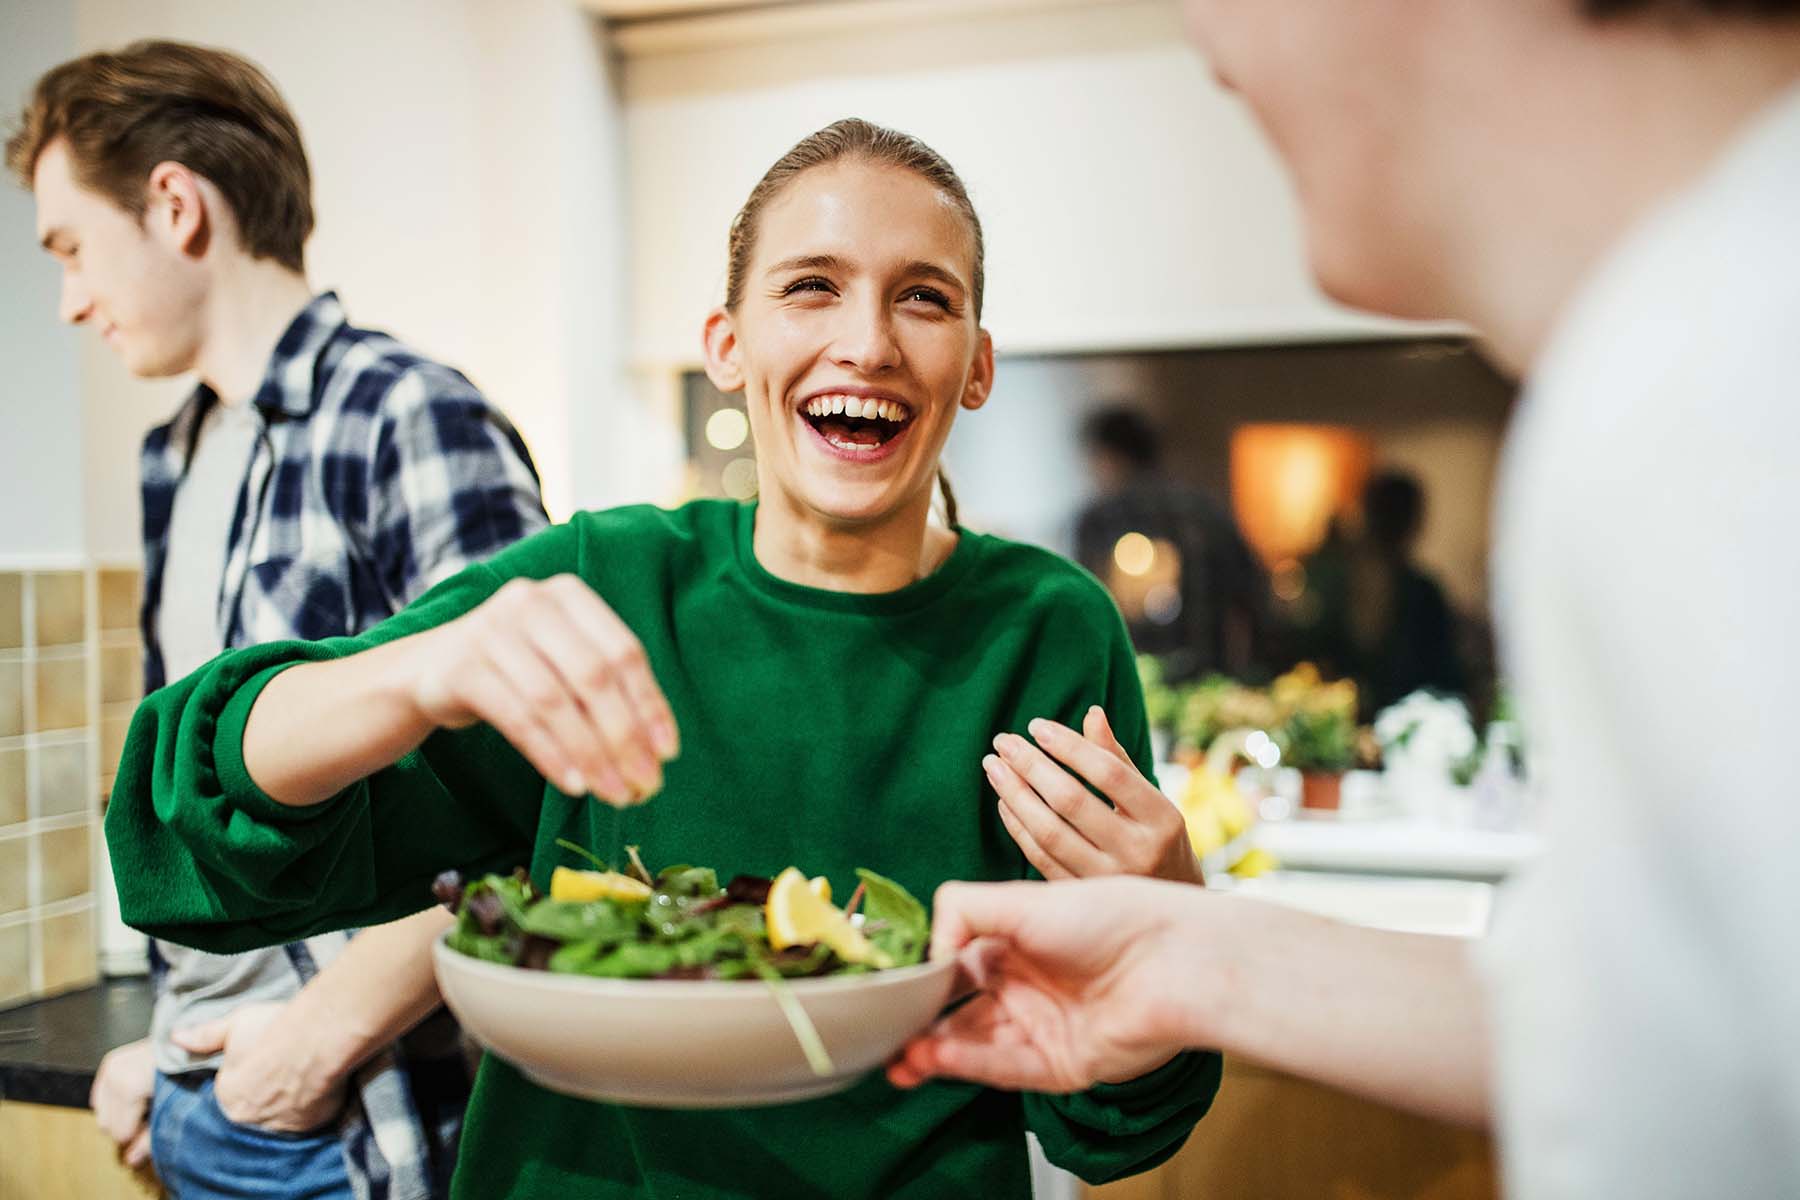 Laughing woman serving salad with people in the background.